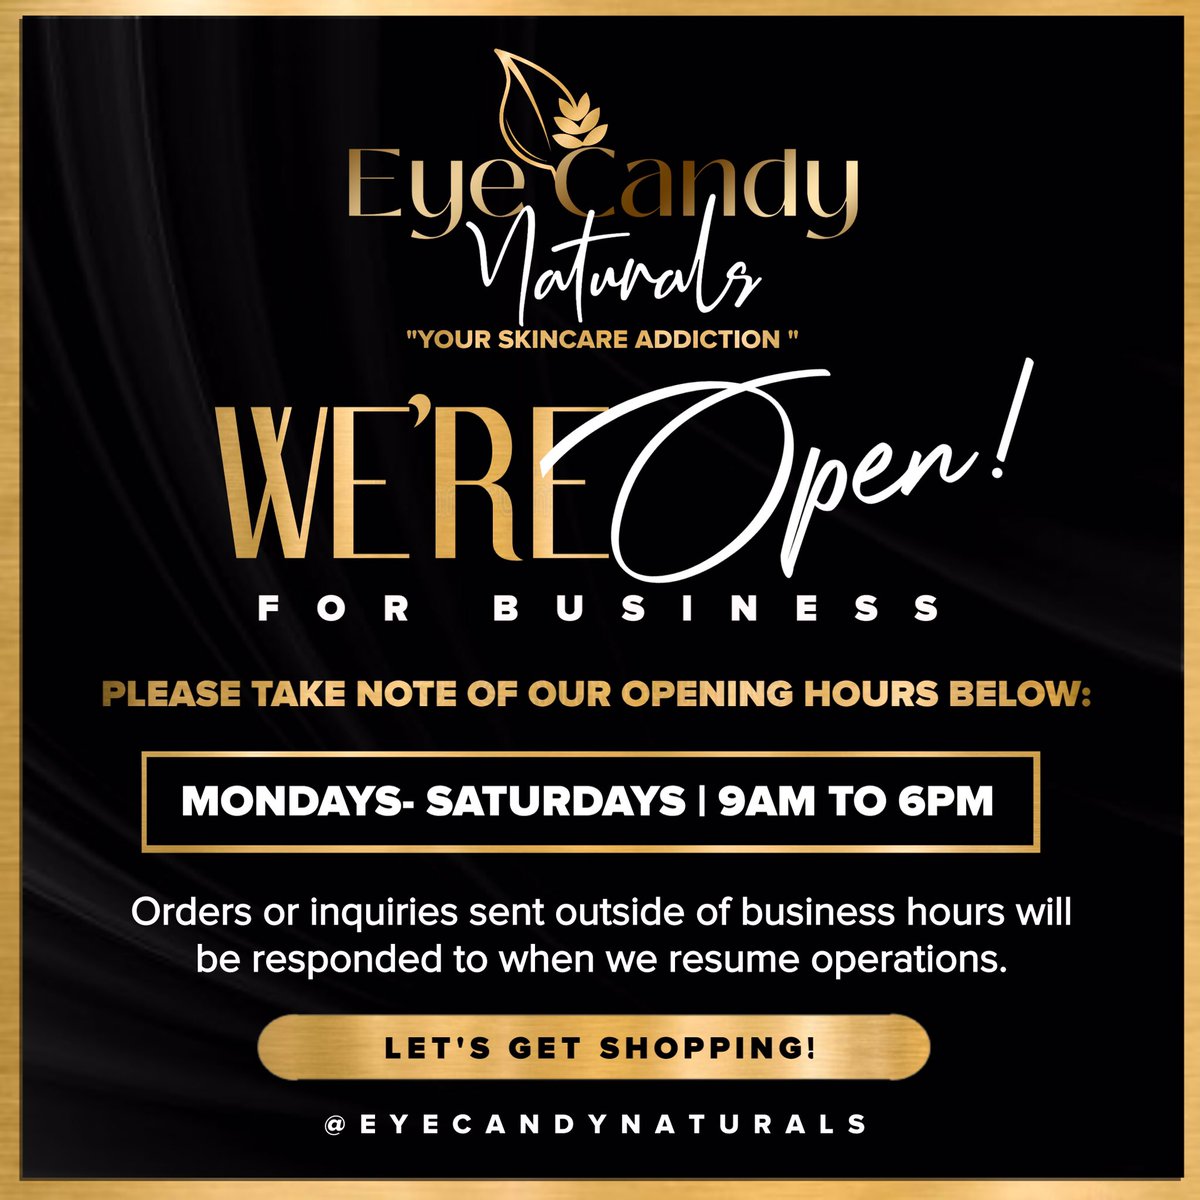 WE ARE OPEN🥳
#supportsmallbusiness #highestquality  #scrubs #bodyscubs #comingsoon #skincare #skincareroutine #skincareproducts #skincaretips #skincarejunkie #organic #natural #cleanskin #flawlessskin #yourskincaresolution #yourskincareaddiction #jamaicanbrand #luxuryskincare